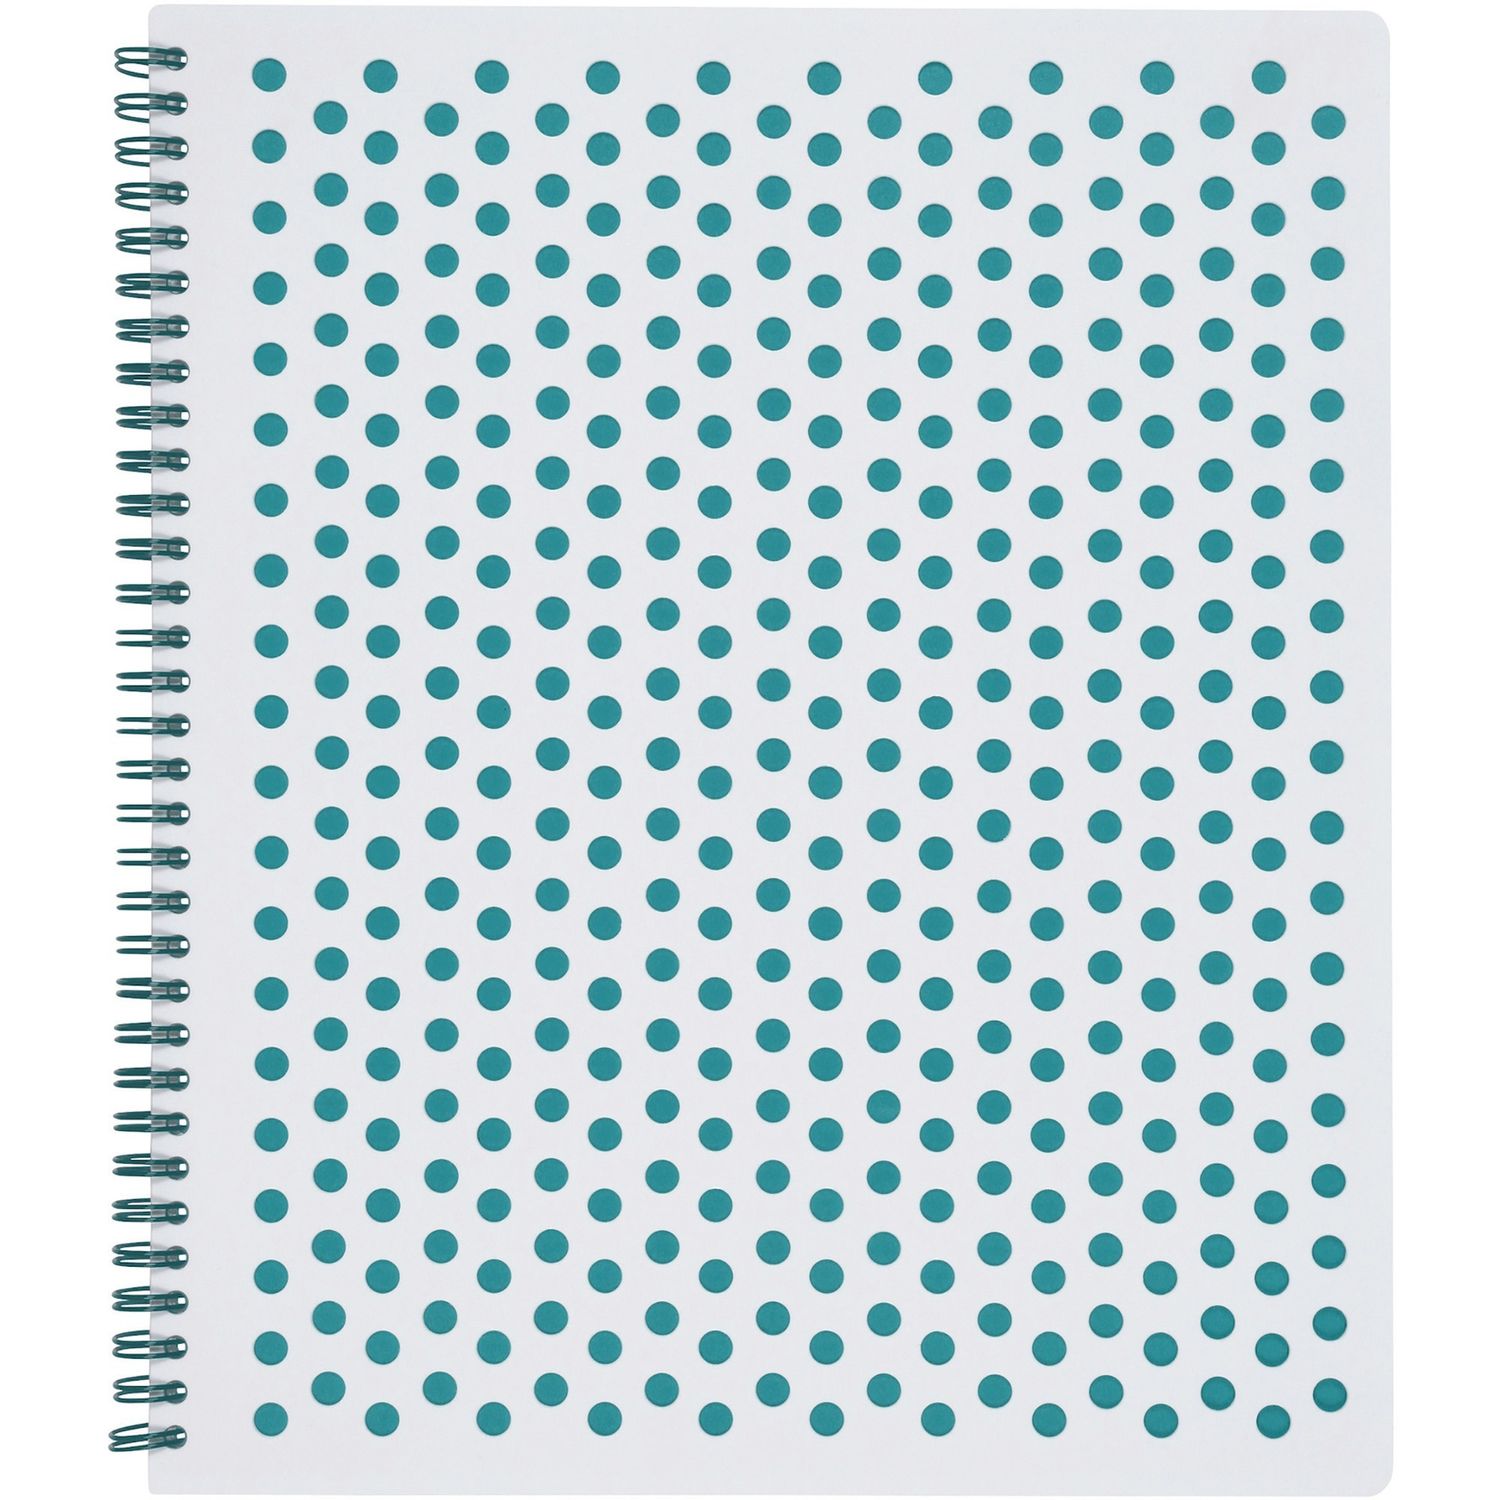 Polka Dot Design Spiral Notebook Double Wire Spiral, College Ruled, 3 Hole(s), 0.50" x 9.5"11.1"Polka Dot, Micro Perforated, Hole-punched, Durable, Wear Resistant, Damage Resistant, 1 Each